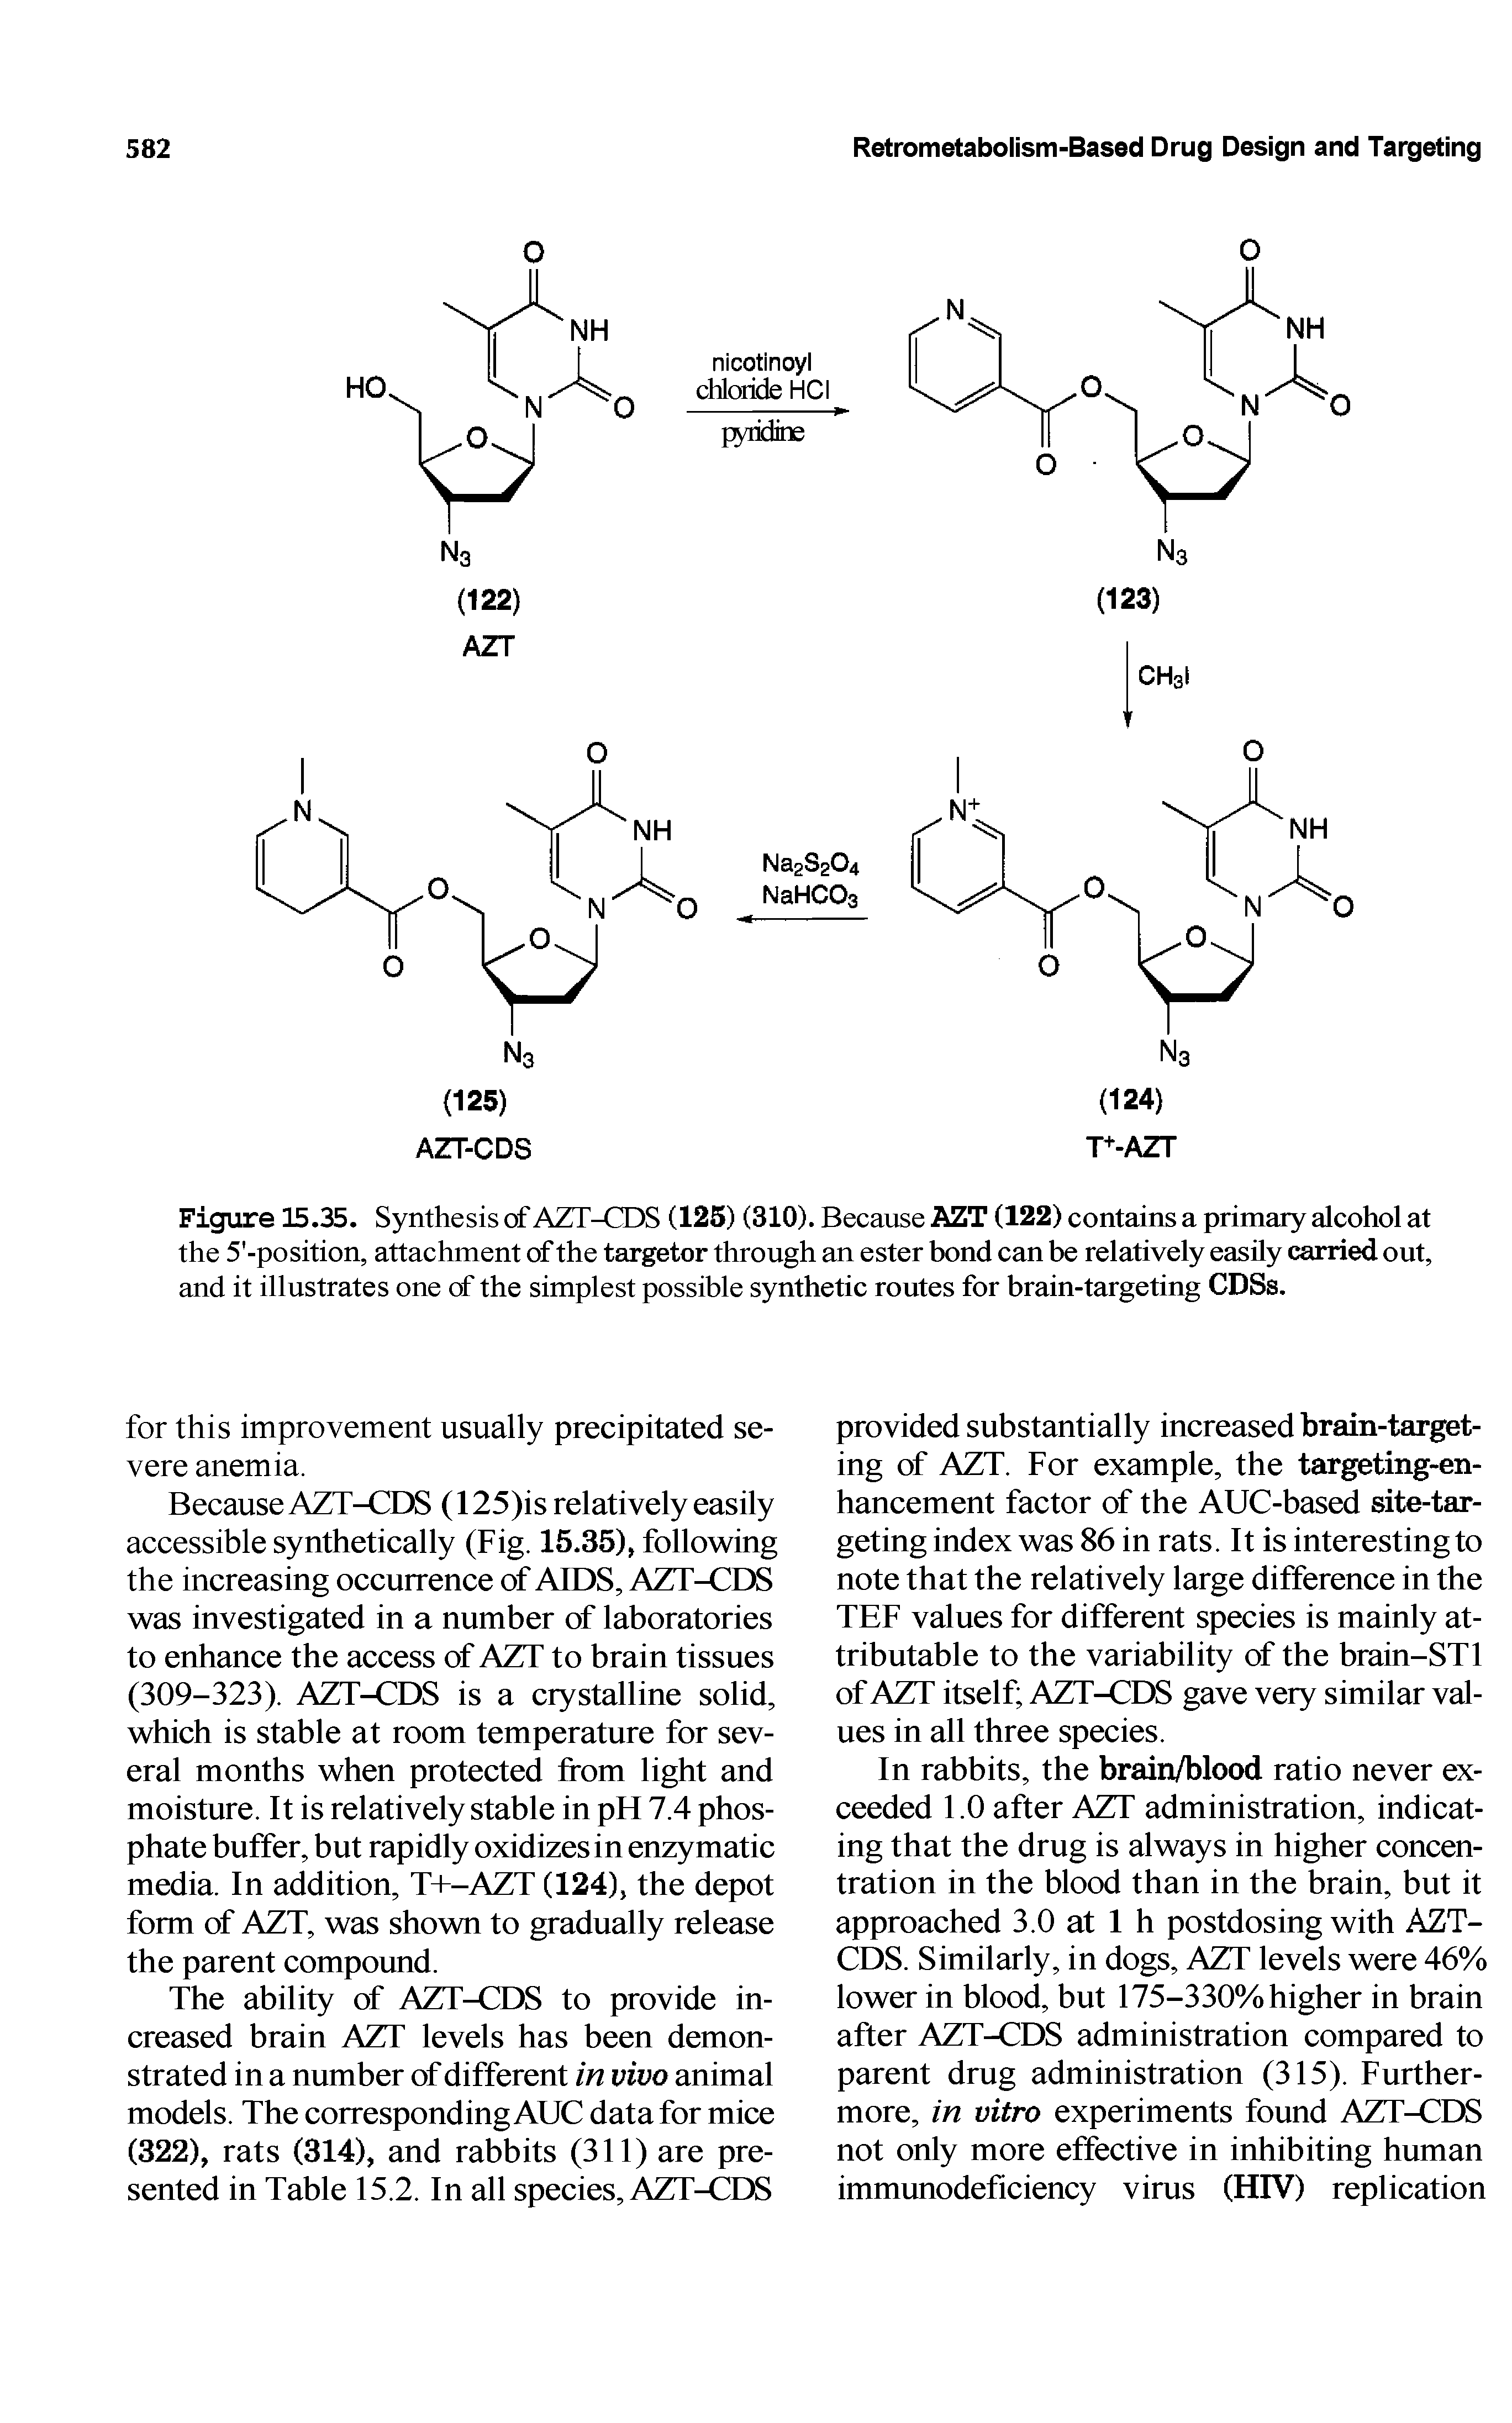 Figure 15.35. Synthesis of AZT-CDS (125) (310). Because AZT (122) contains a primary alcohol at the 5 -position, attachment of the targetor through an ester bond can be relatively easily carried out, and it illustrates one of the simplest possible synthetic routes for brain-targeting CDSs.